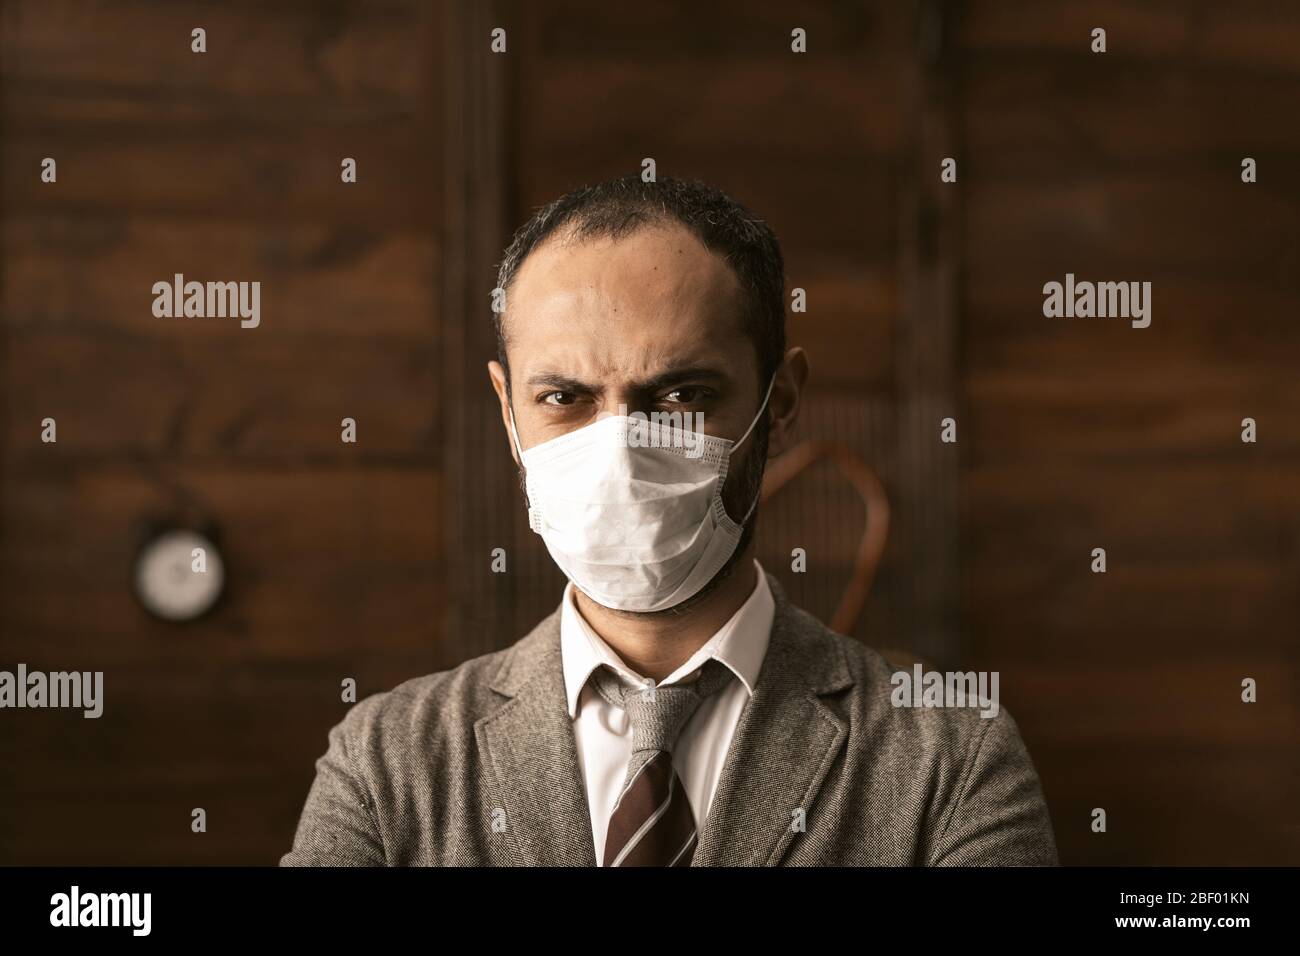 Business man In Protective Mask Is in isolation Stock Photo